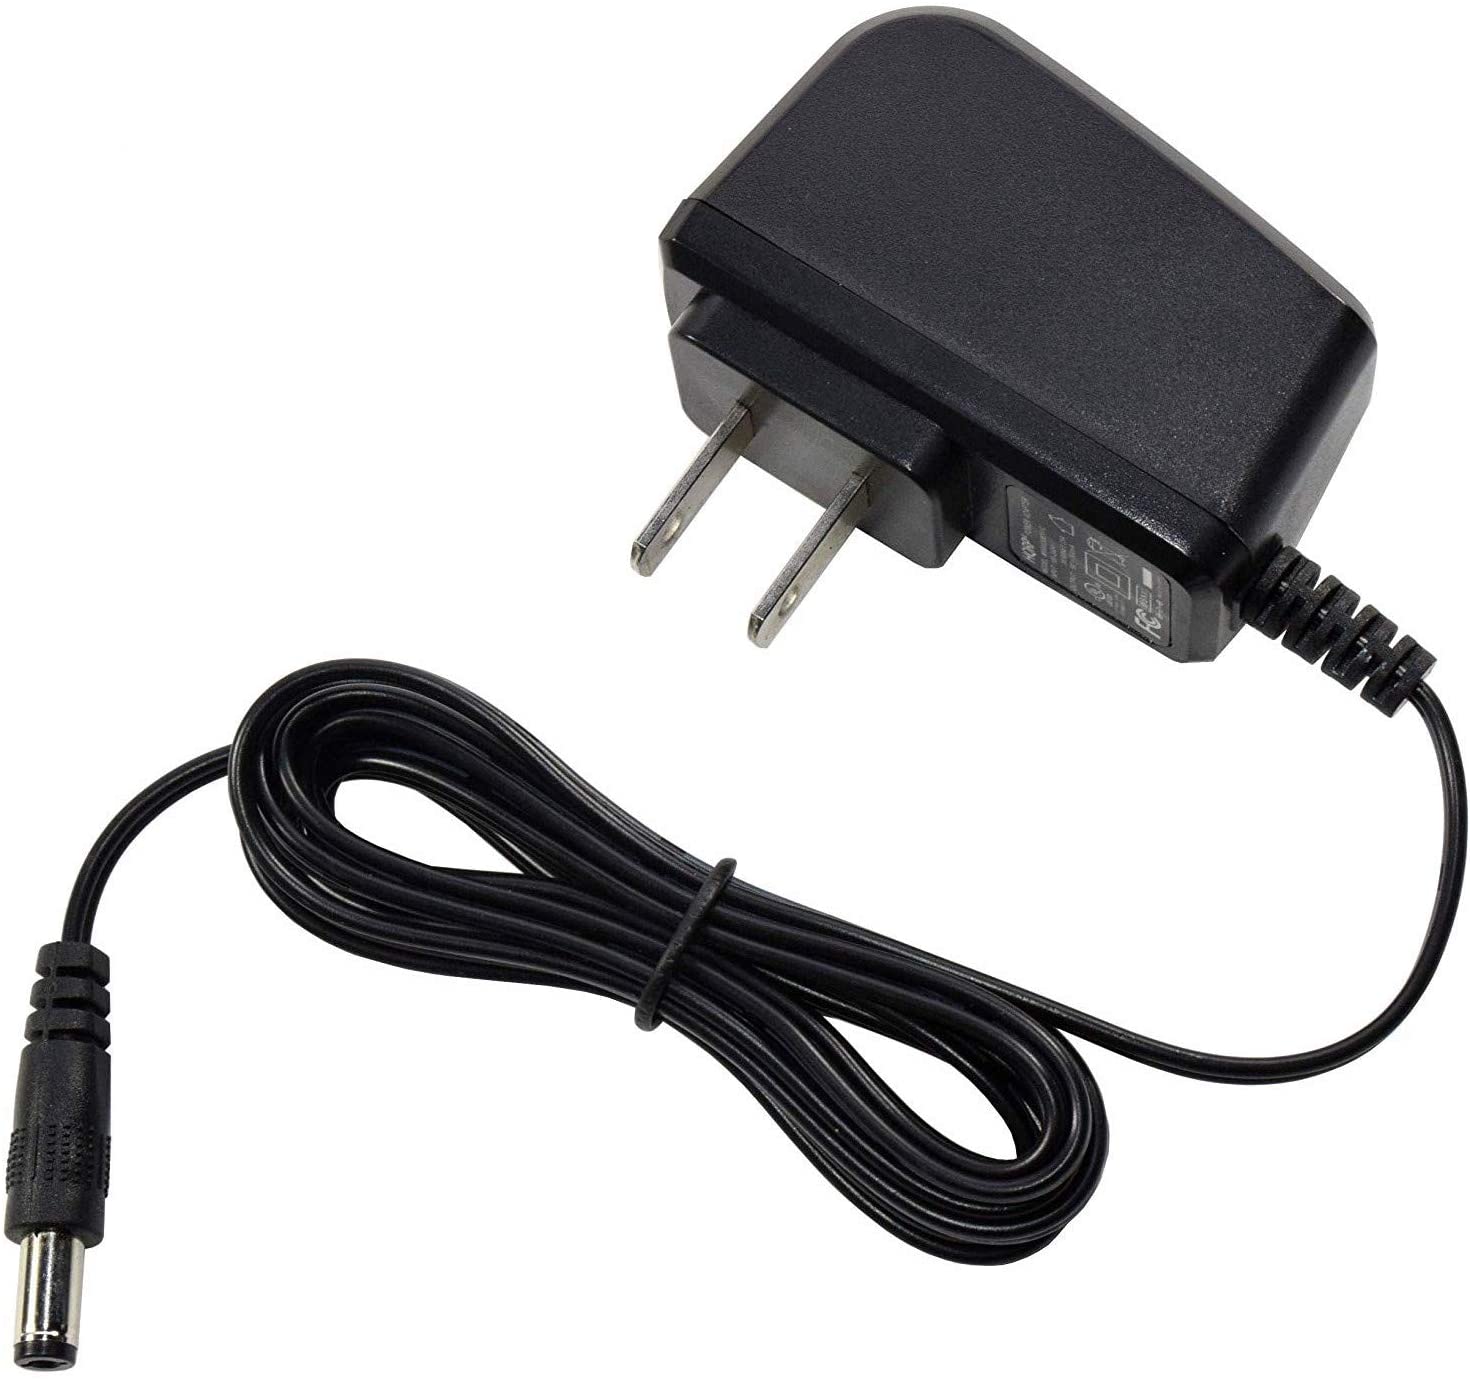 HQRP AC Adapter / Power Supply compatible with Ibanez DS7 DISTORTION / FLP FLANGER Guitar Effects pedals